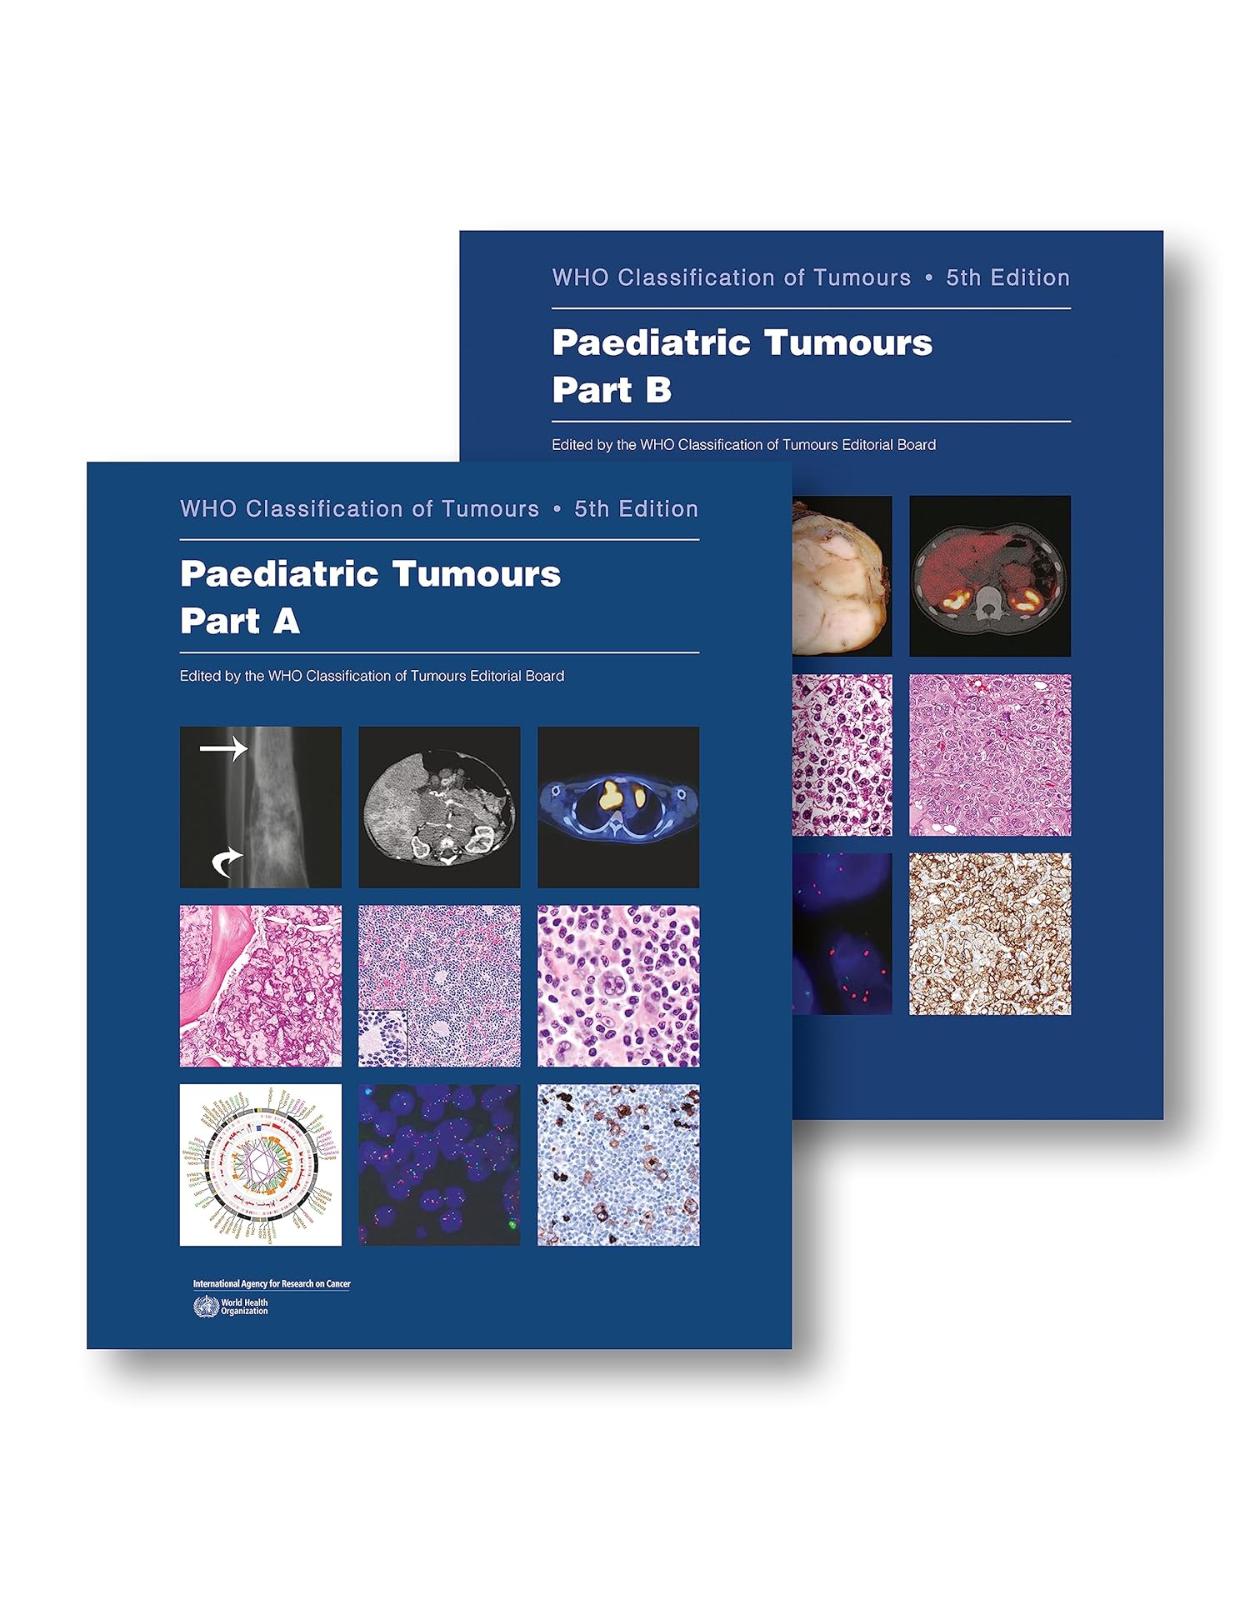 Paediatric Tumours. WHO Classification of Tumours, 5th Edition, Volume 7